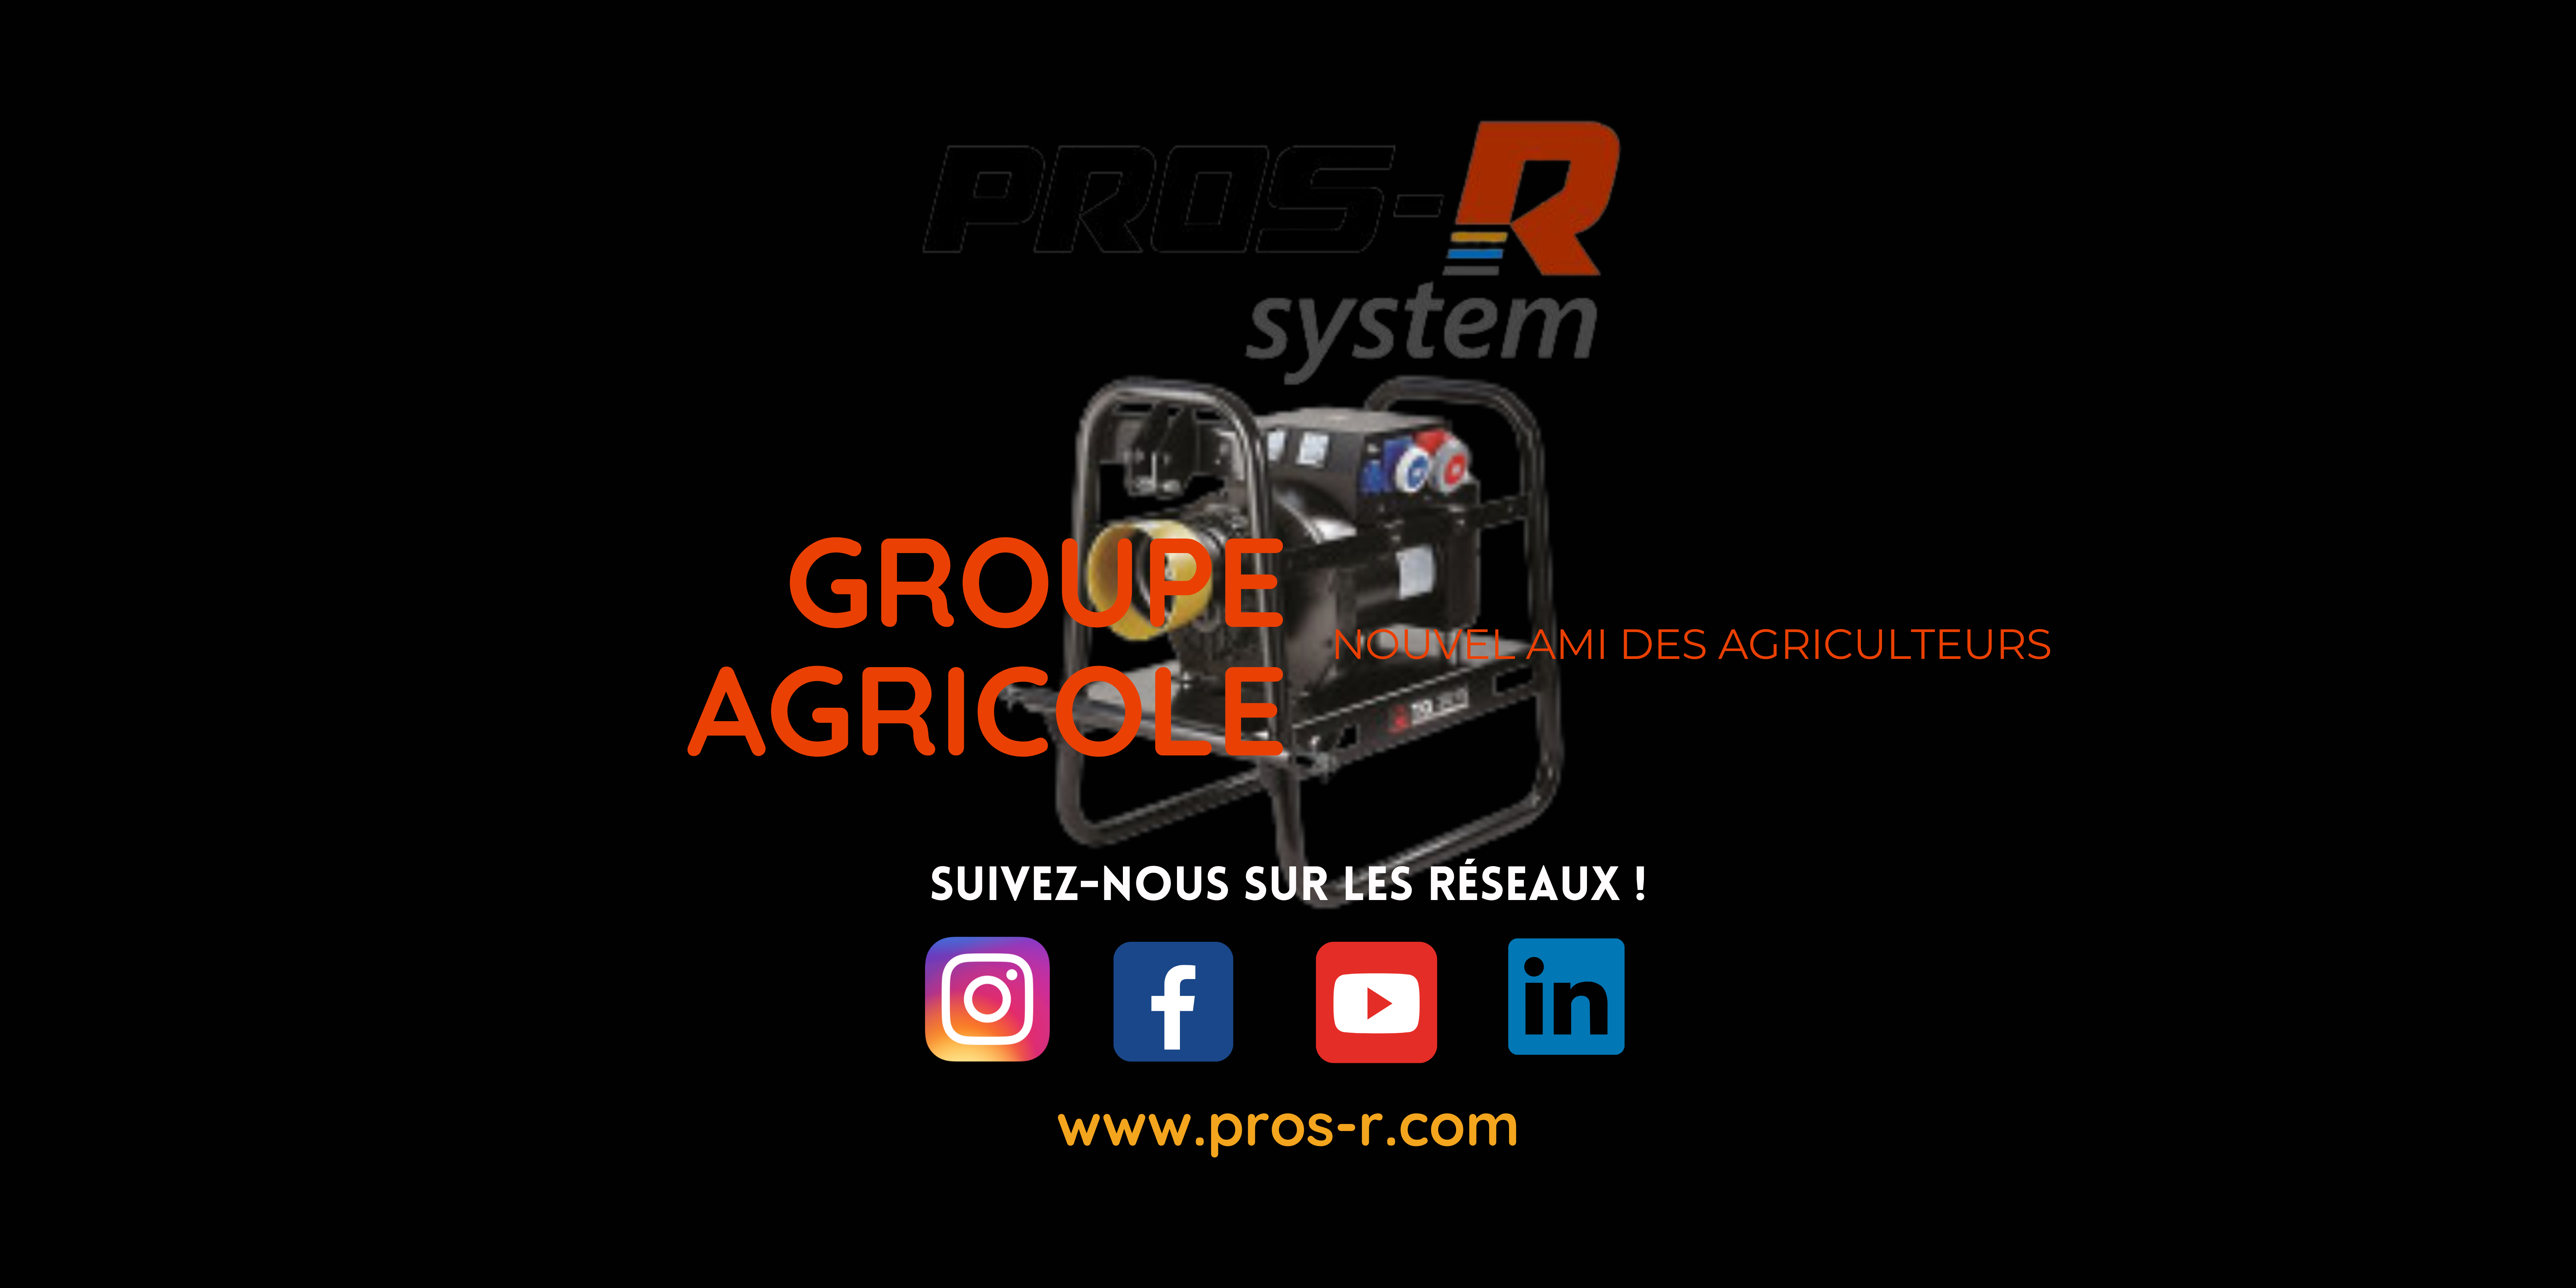 The agricultural group, new friend of farmers PROS-R System